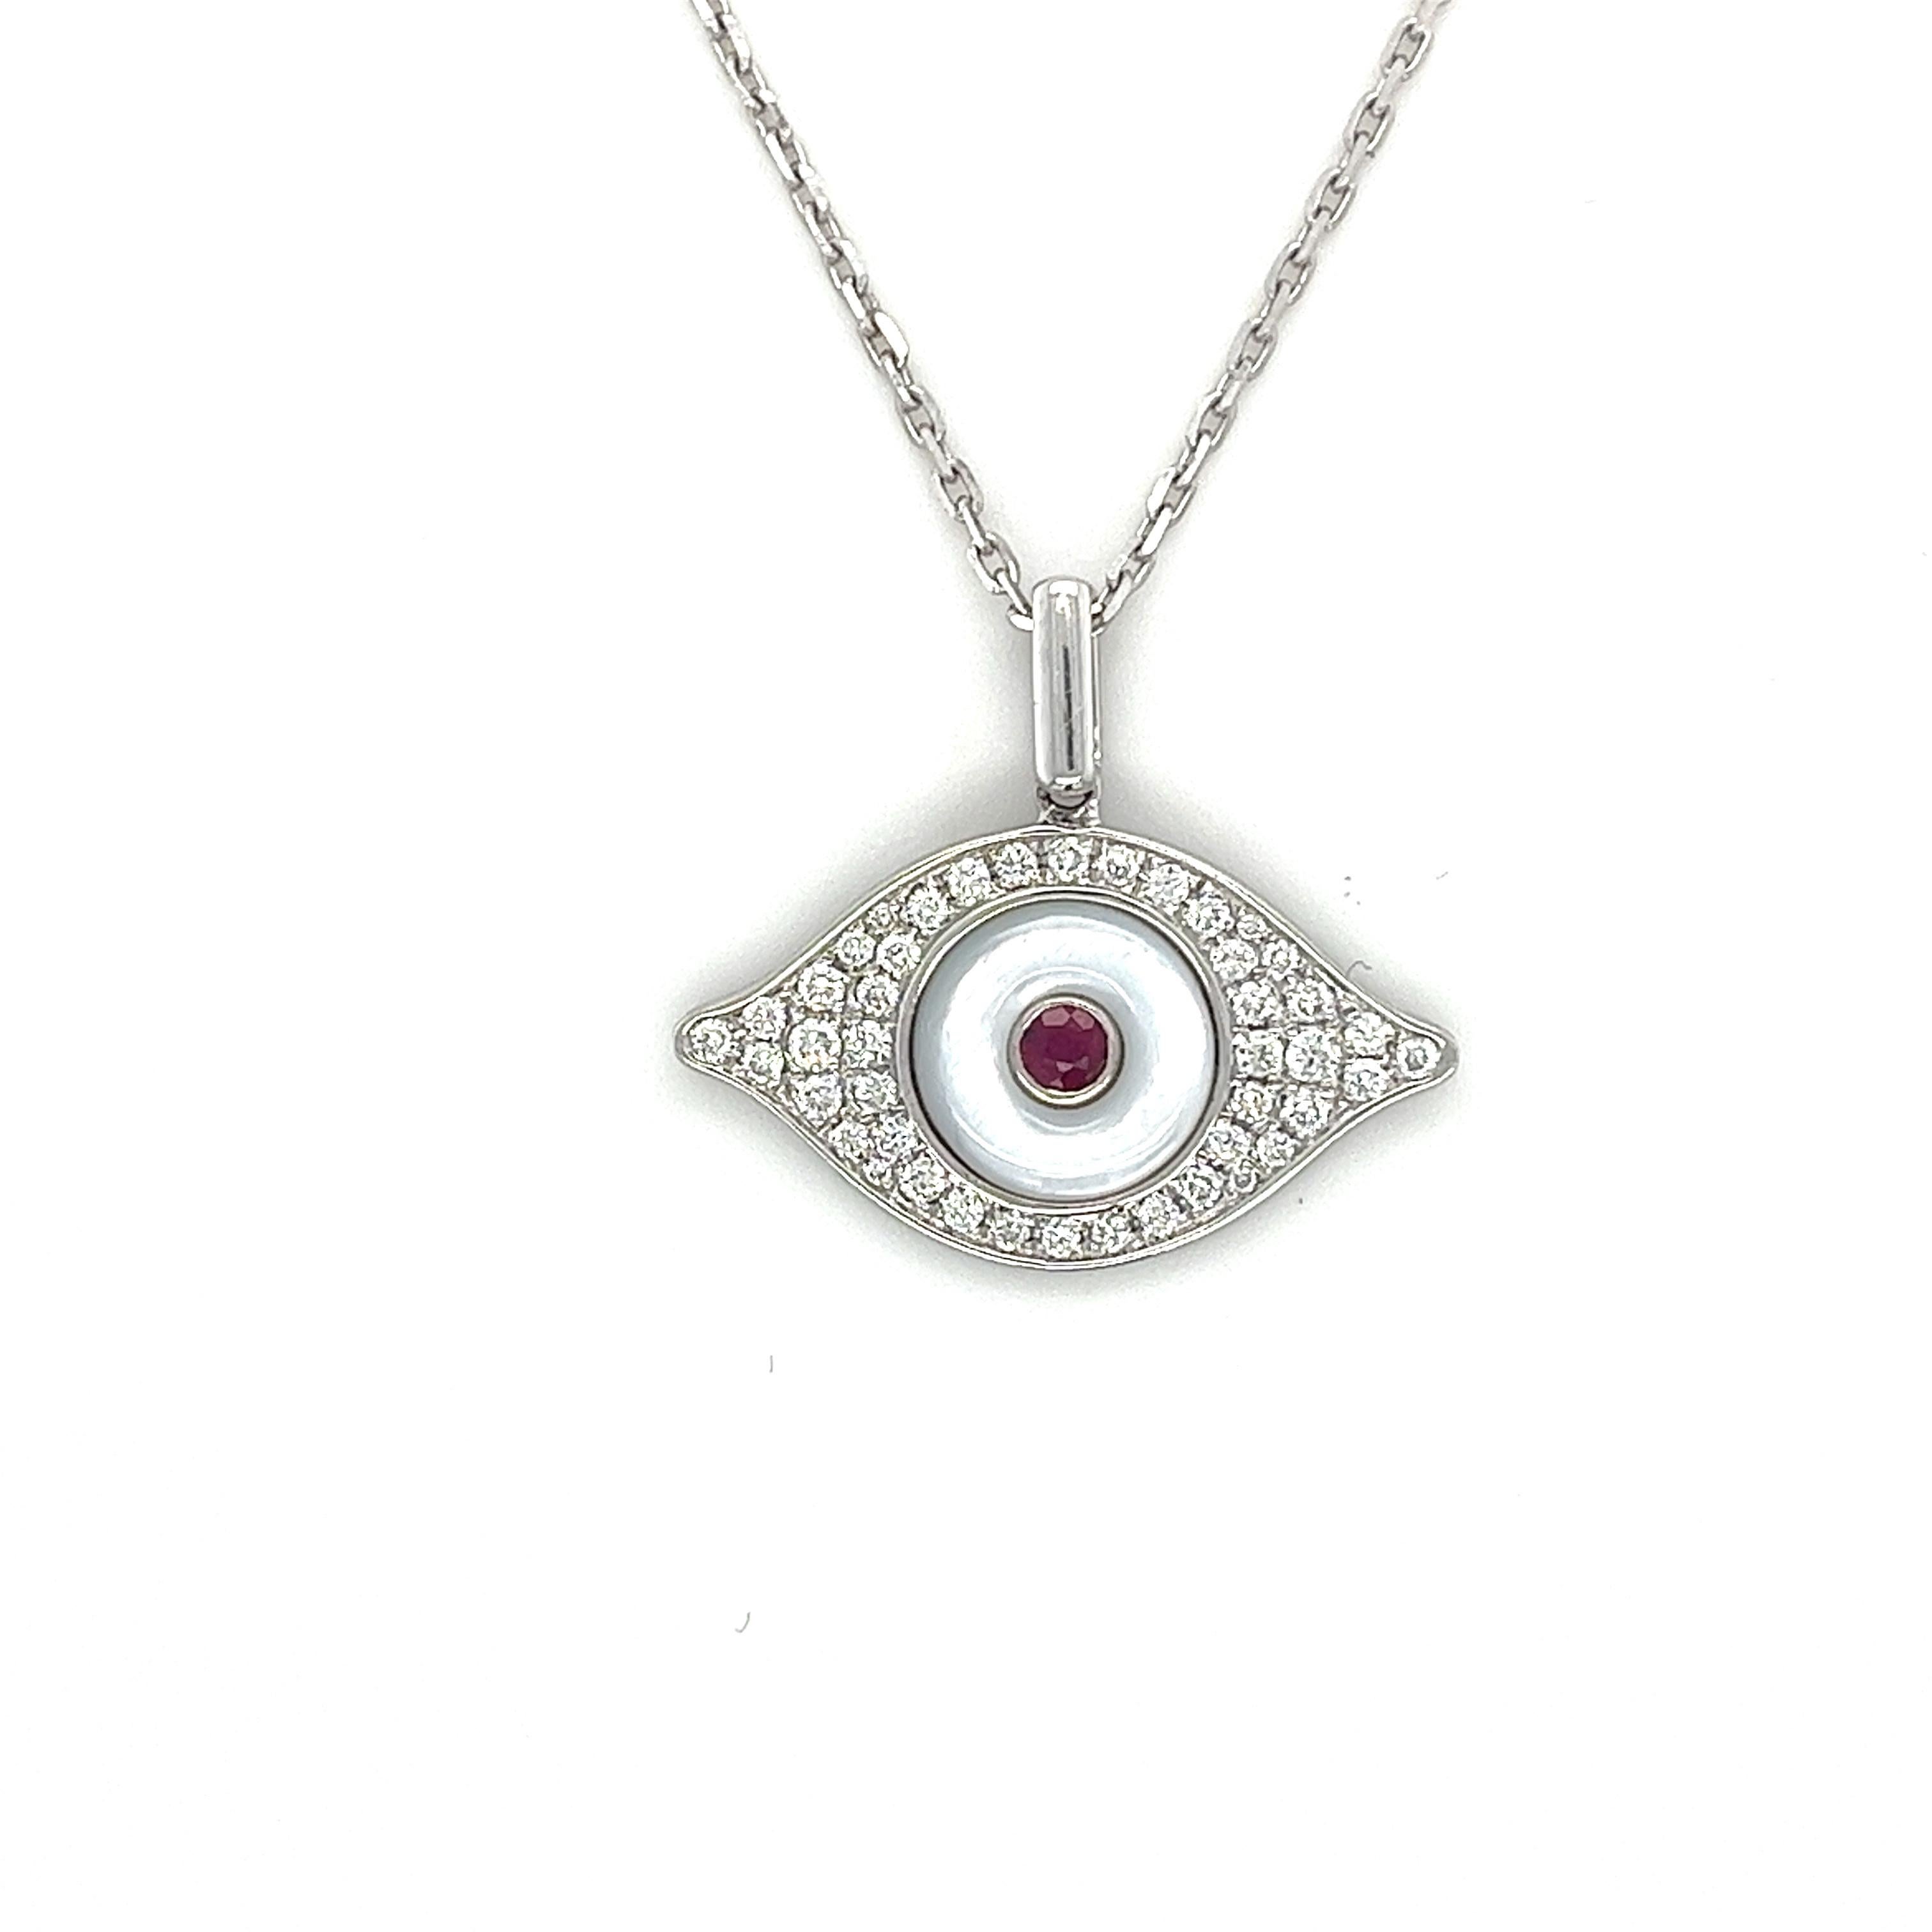 18K White Gold Diamond Evil Eye Pendant Necklace

44 Diamonds 0.37 CT
1 Ruby 0.12 CT
1 White Pearl 0.78 CT
18 K White Gold 5.39 CT

This 18K White Gold necklace is strung with an Evil Eye motif - a spiritual symbol thought to ward off negative